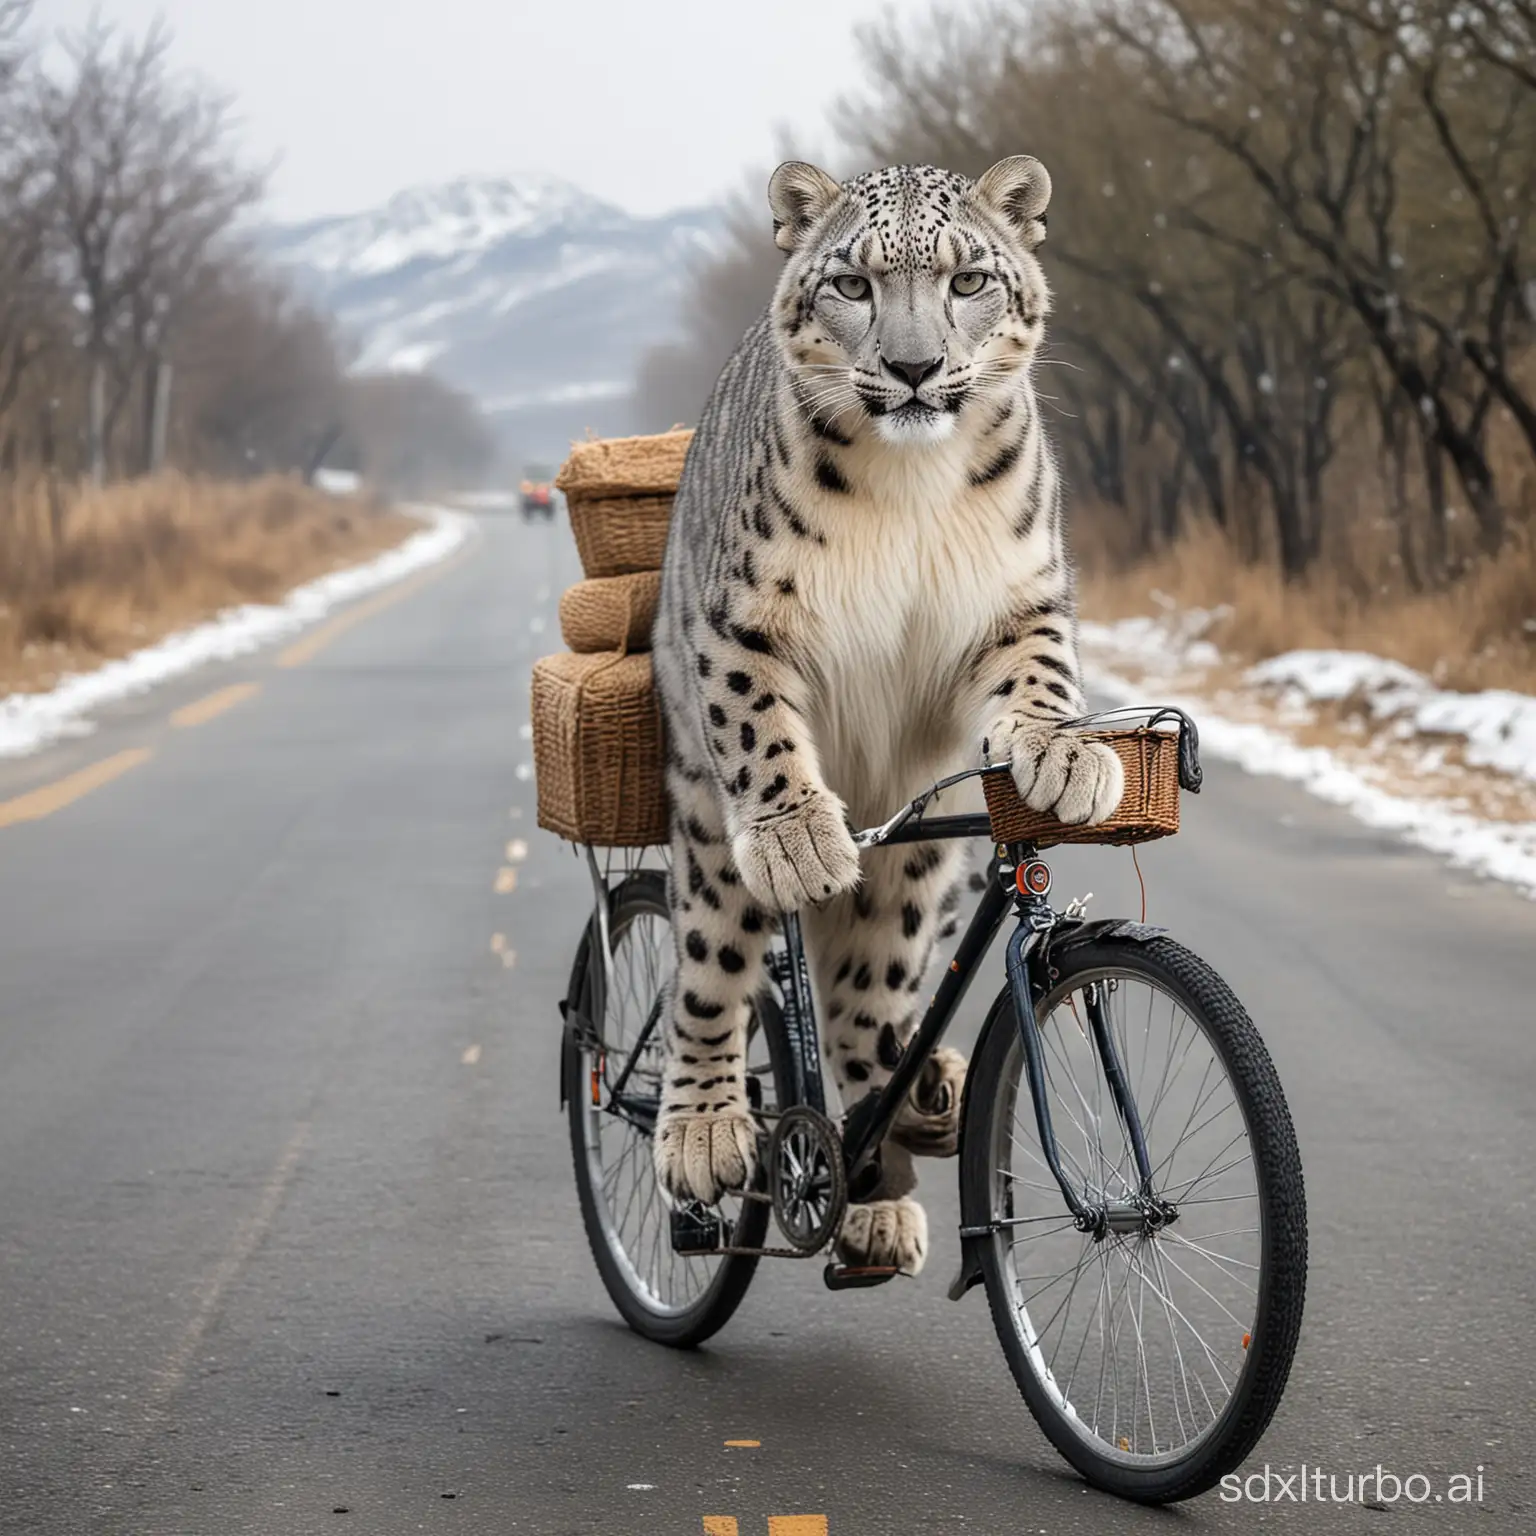 The snow leopard rides a bicycle on the road.